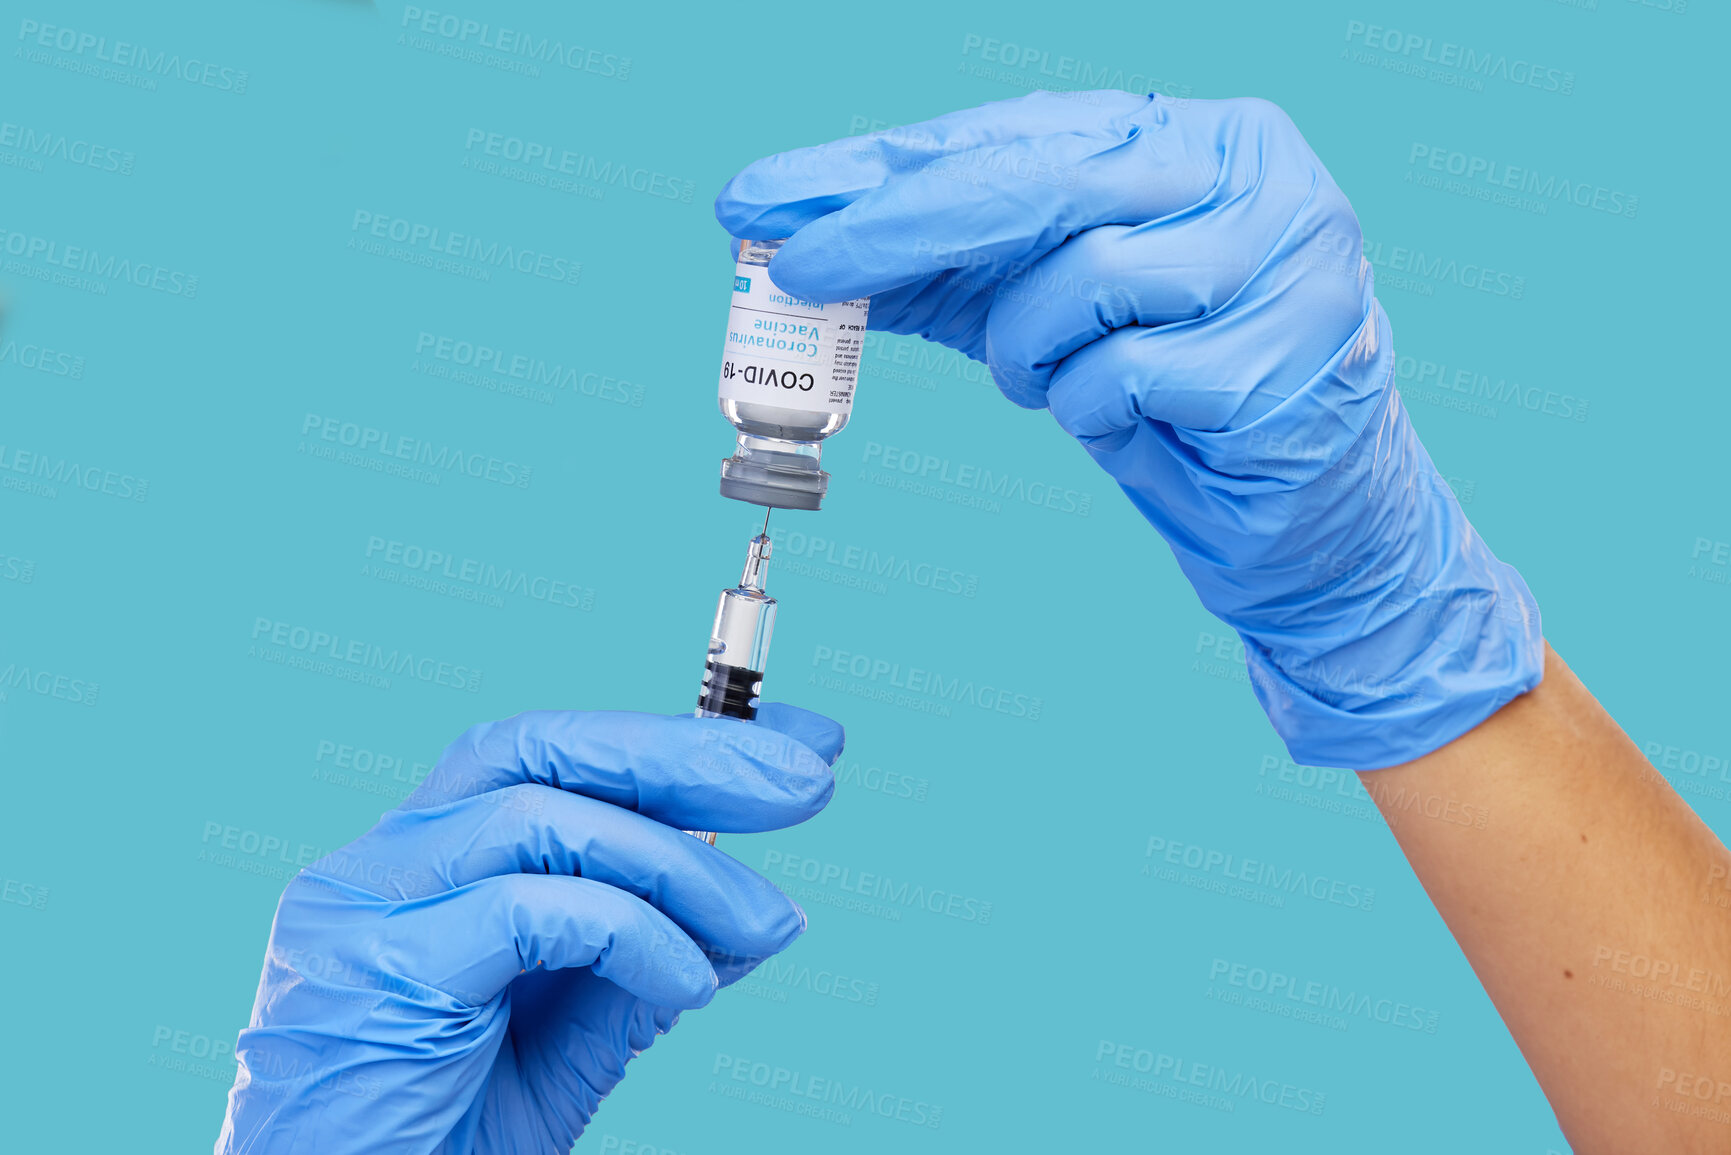 Buy stock photo Shot of a nurse filling up a syringe with vaccination fluid against a studio background